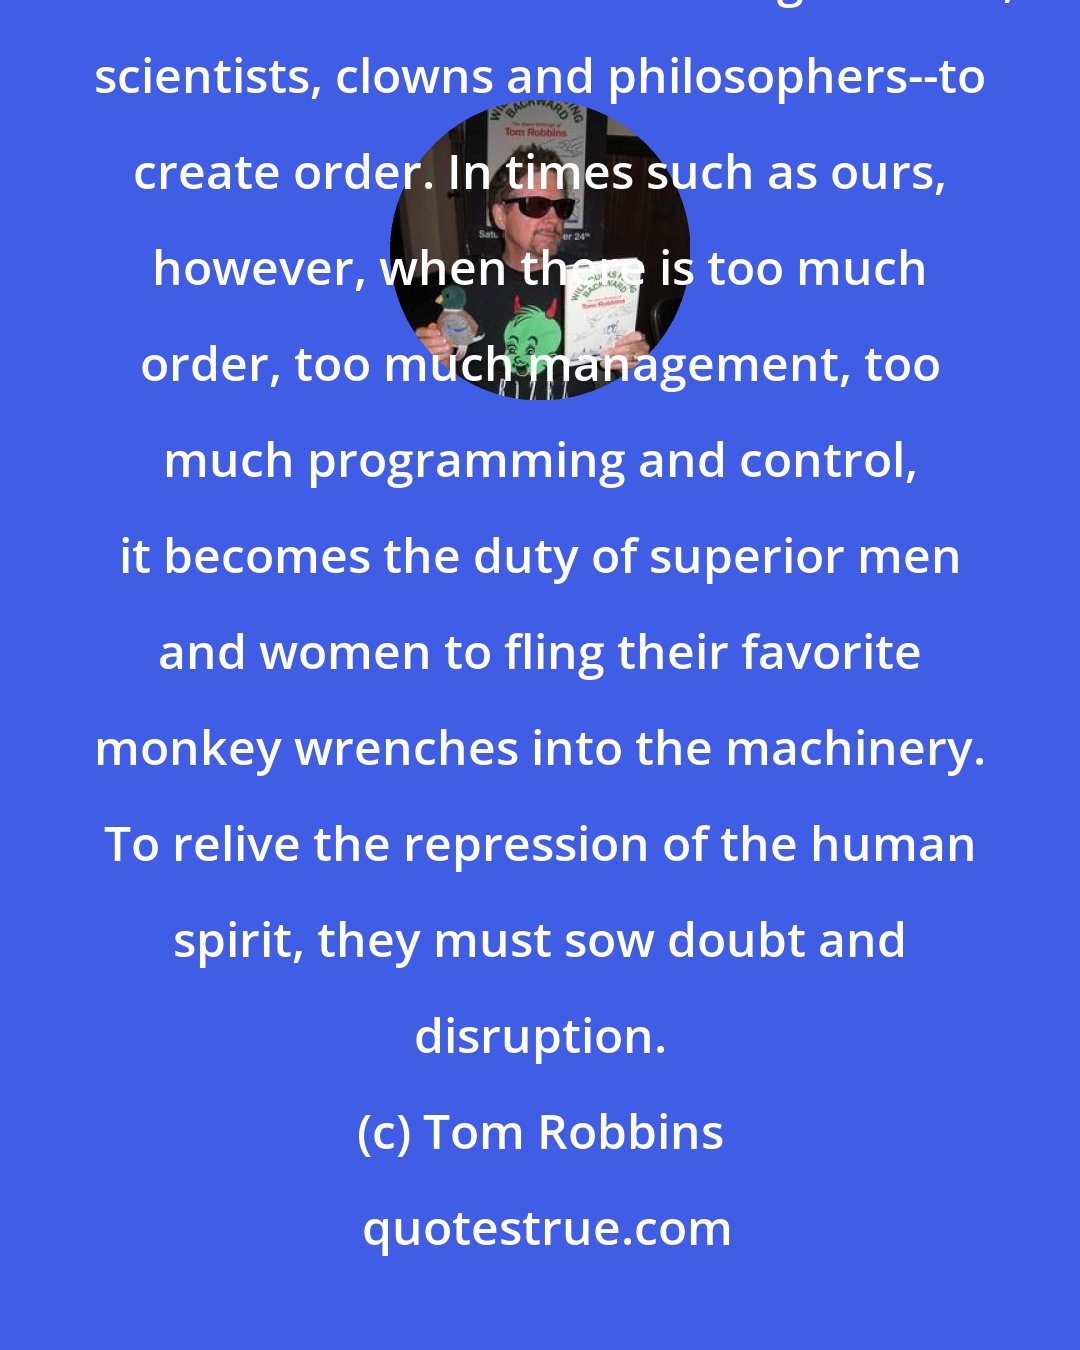 Tom Robbins: In times of widespread chaos and confusion, it has been the duty of more advanced human beings--artists, scientists, clowns and philosophers--to create order. In times such as ours, however, when there is too much order, too much management, too much programming and control, it becomes the duty of superior men and women to fling their favorite monkey wrenches into the machinery. To relive the repression of the human spirit, they must sow doubt and disruption.